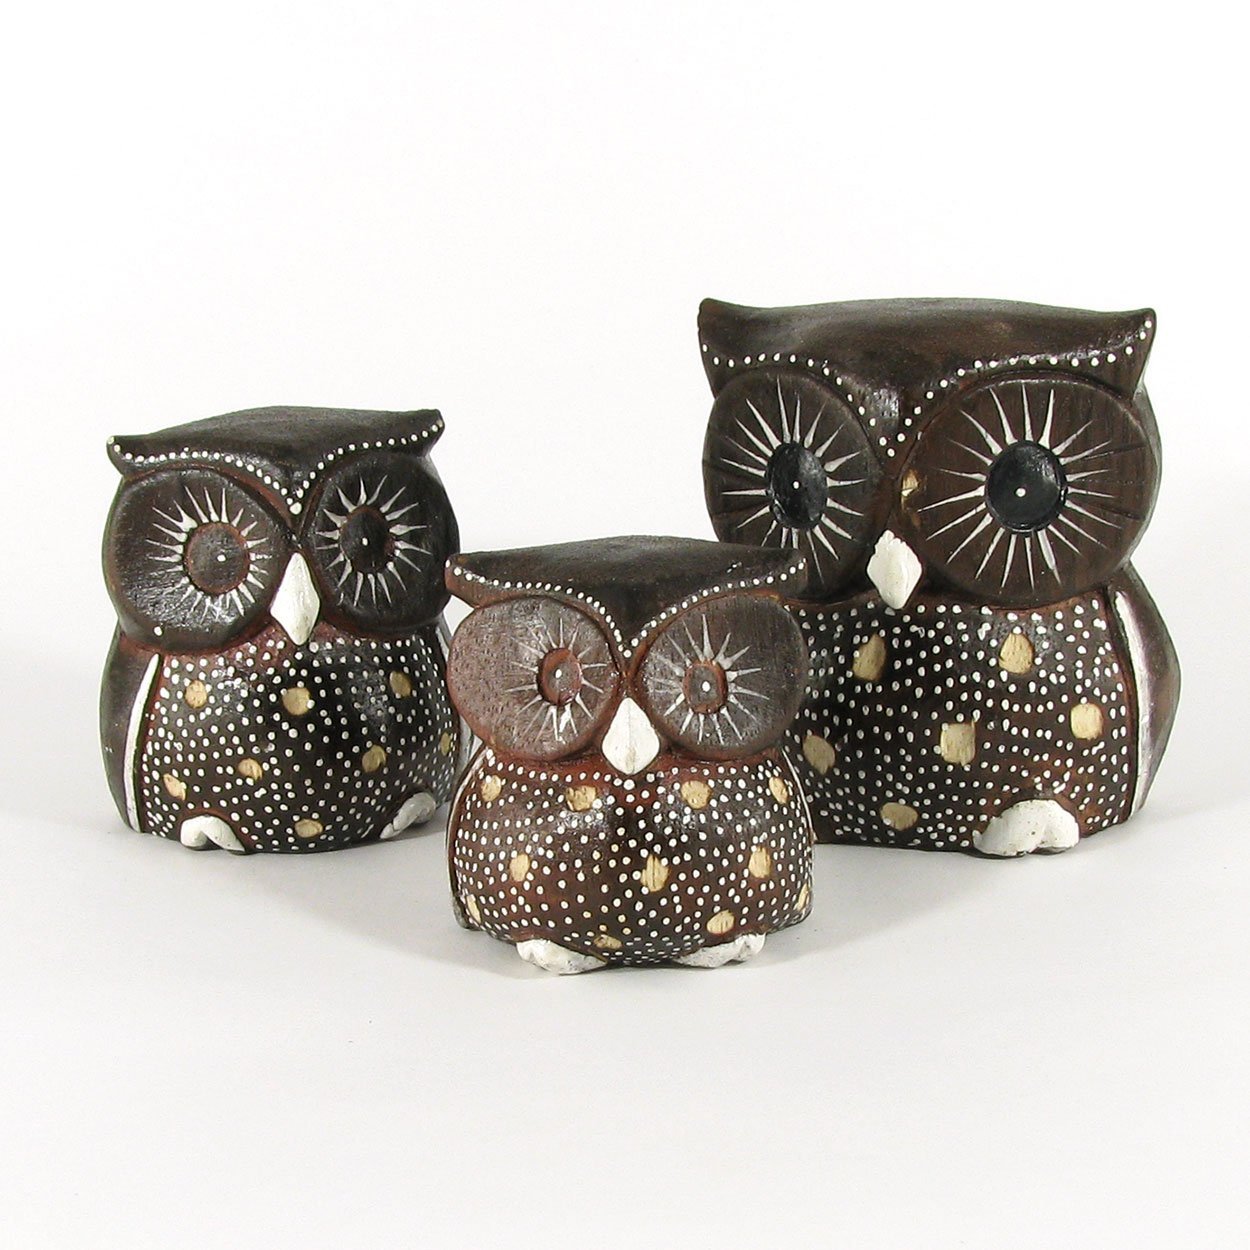 140042 - Set of Three 2-4in Wooden Owls - Etched Dots